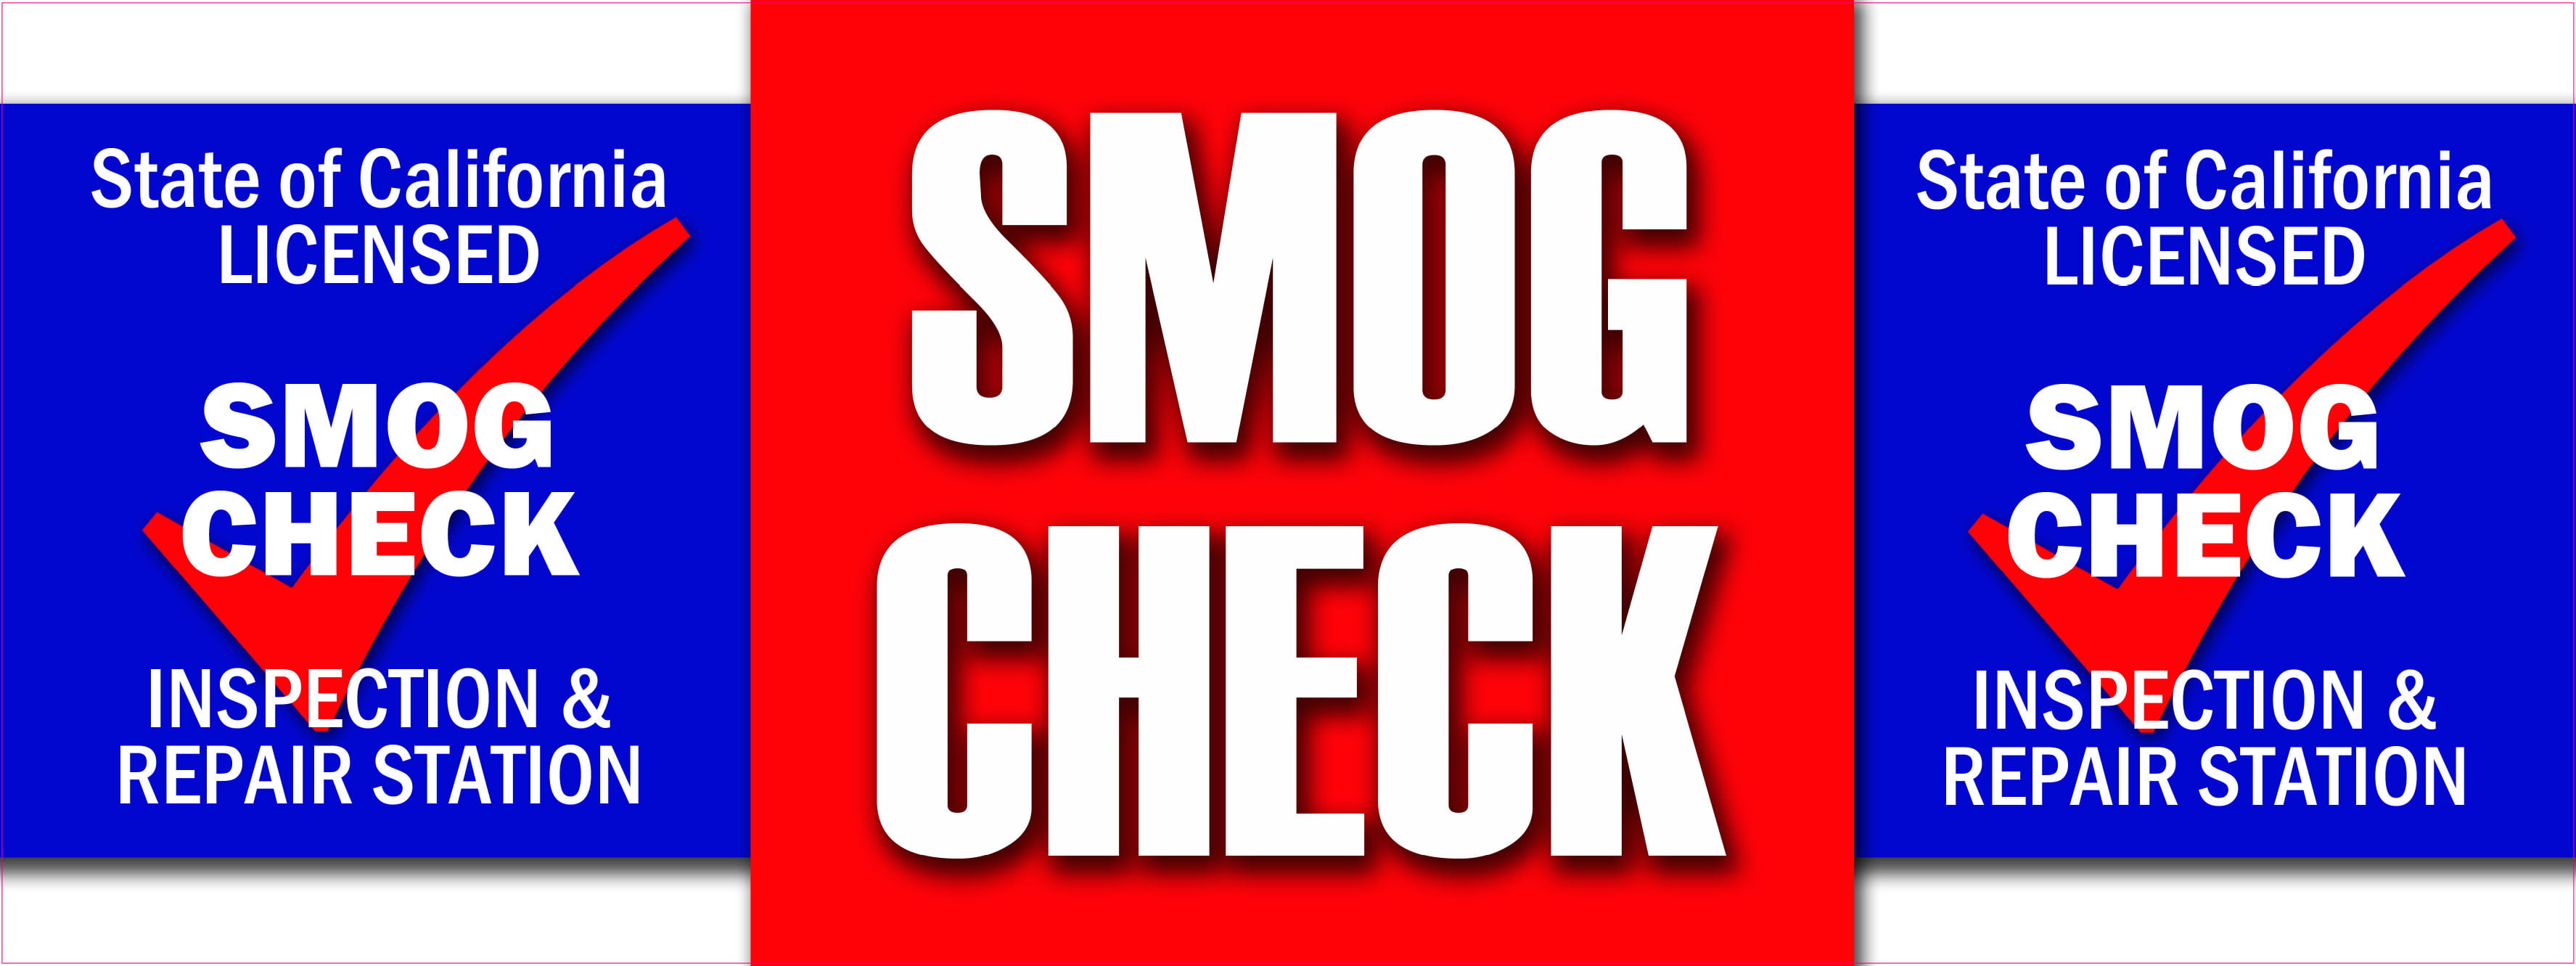 Decal Sticker Multiple Sizes Auto Repair Service Smog Check Inspection Automotive Complete auto Repair and Service Outdoor Store Sign Blue Set of 10 